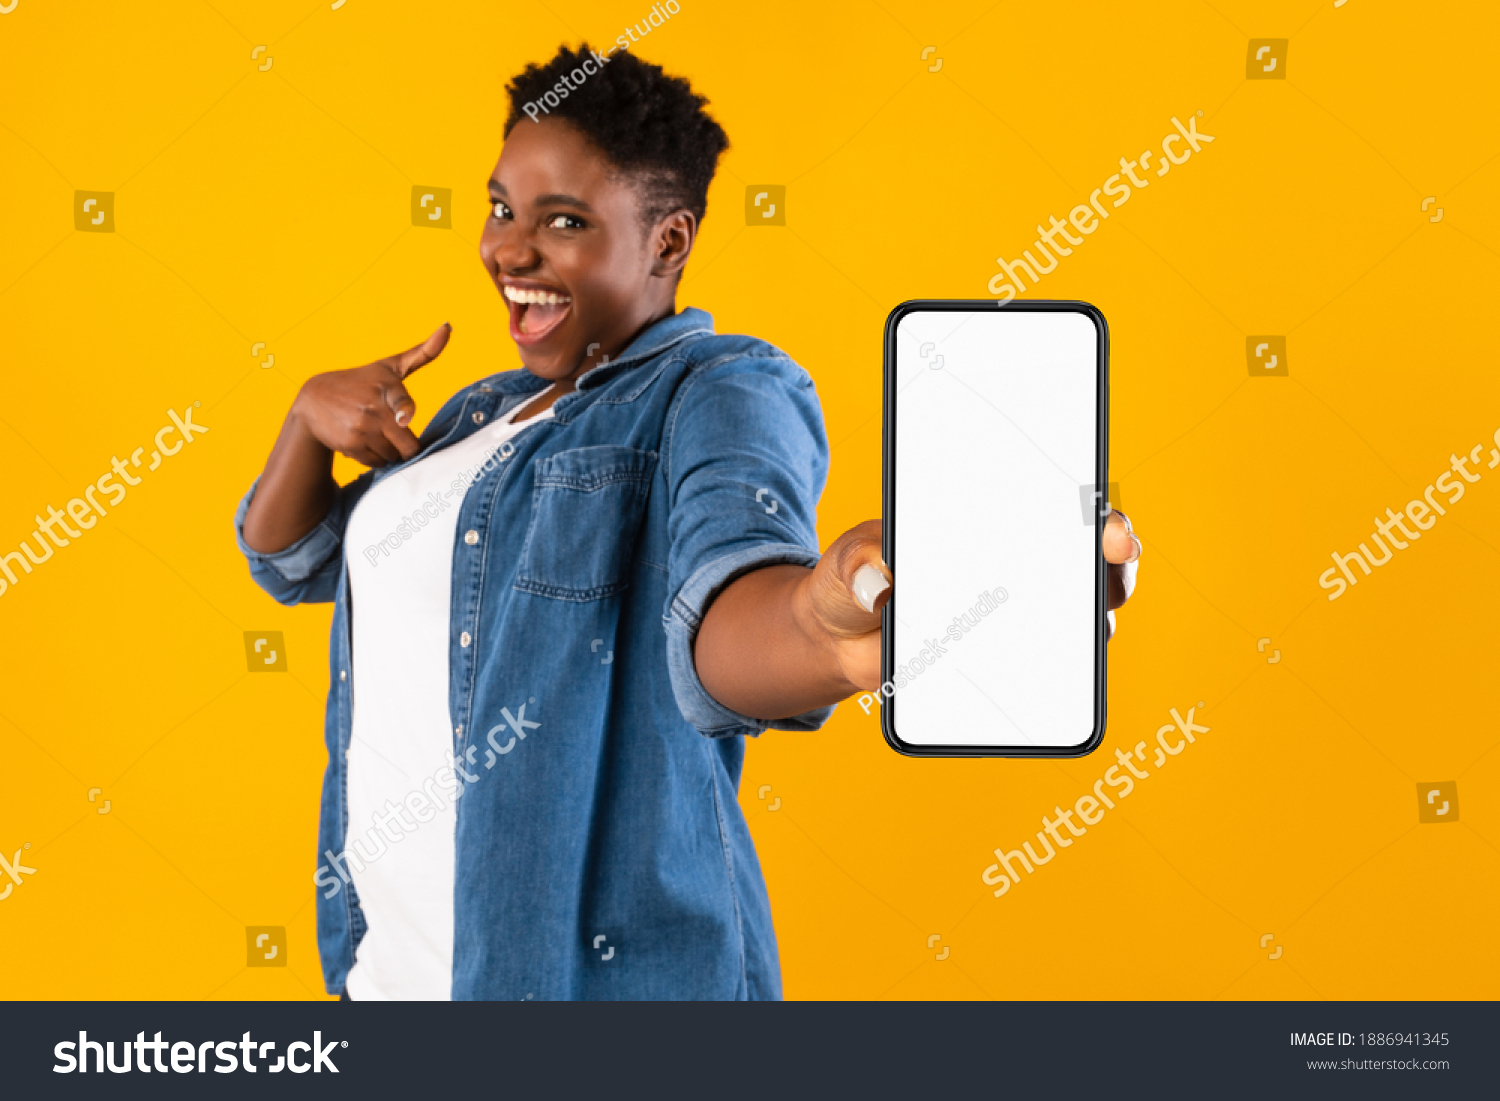 Mobile Application Ad. Excited African Woman Showing Phone Empty Screen Recommending App Standing Over Yellow Studio Background, Smiling To Camera. Cellphone Display Mockup, Check This Apps #1886941345